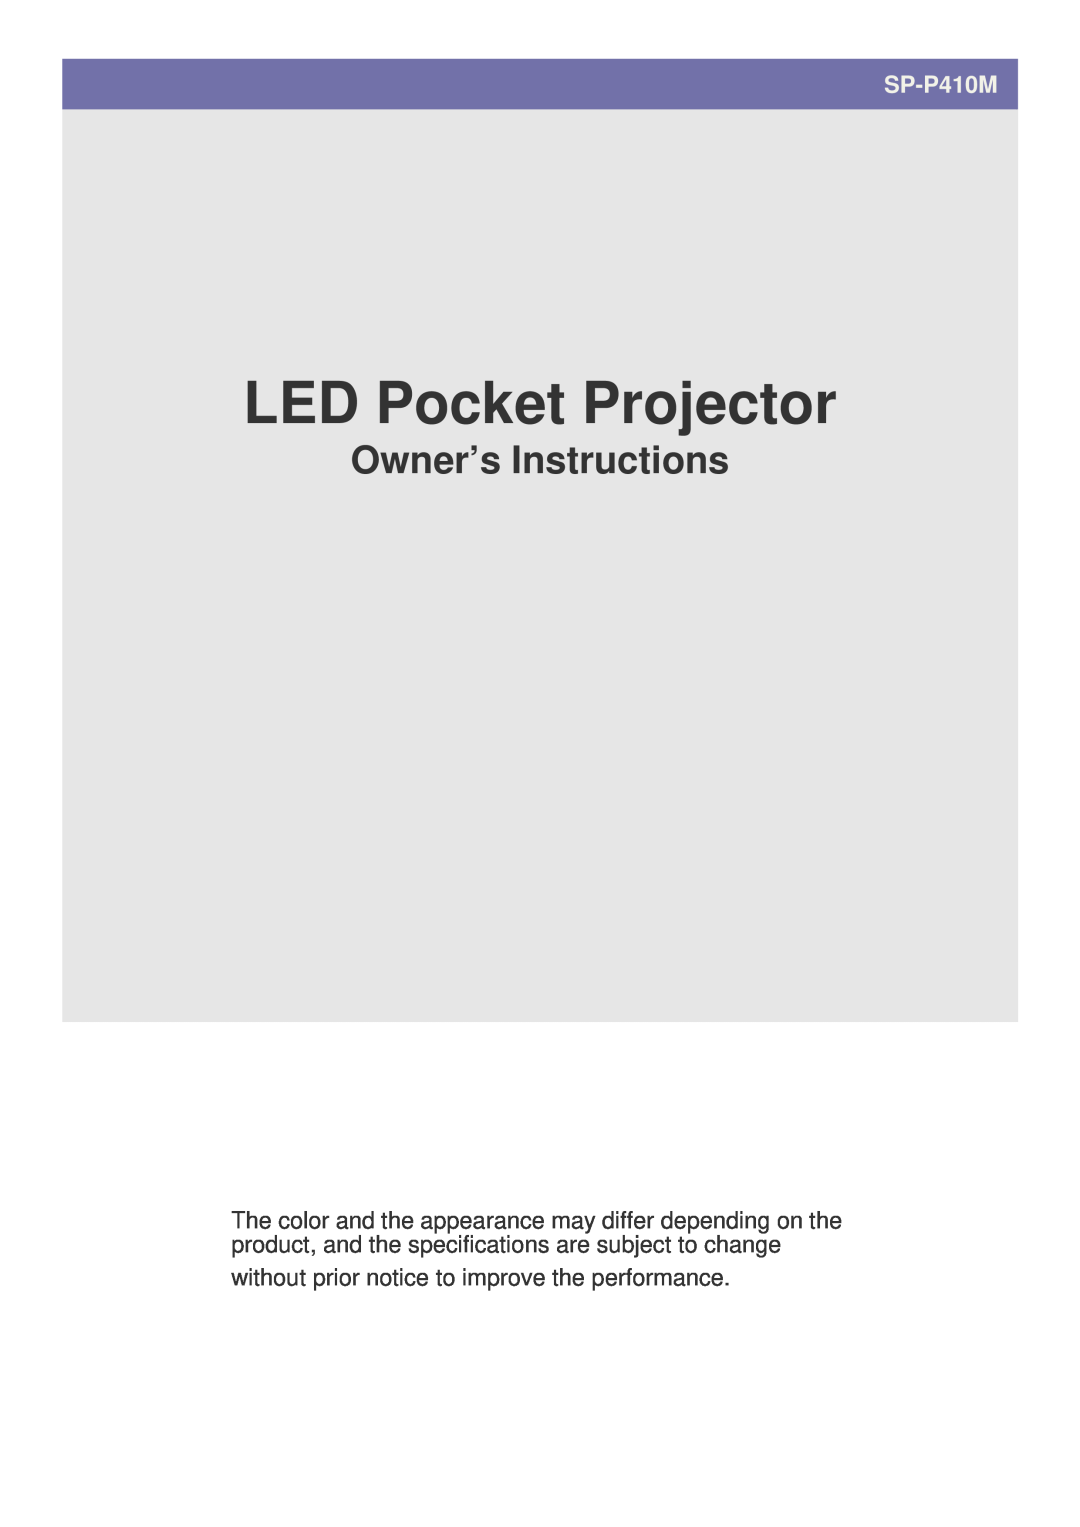 Samsung SP-P410M specifications LED Pocket Projector, Owner’s Instructions 